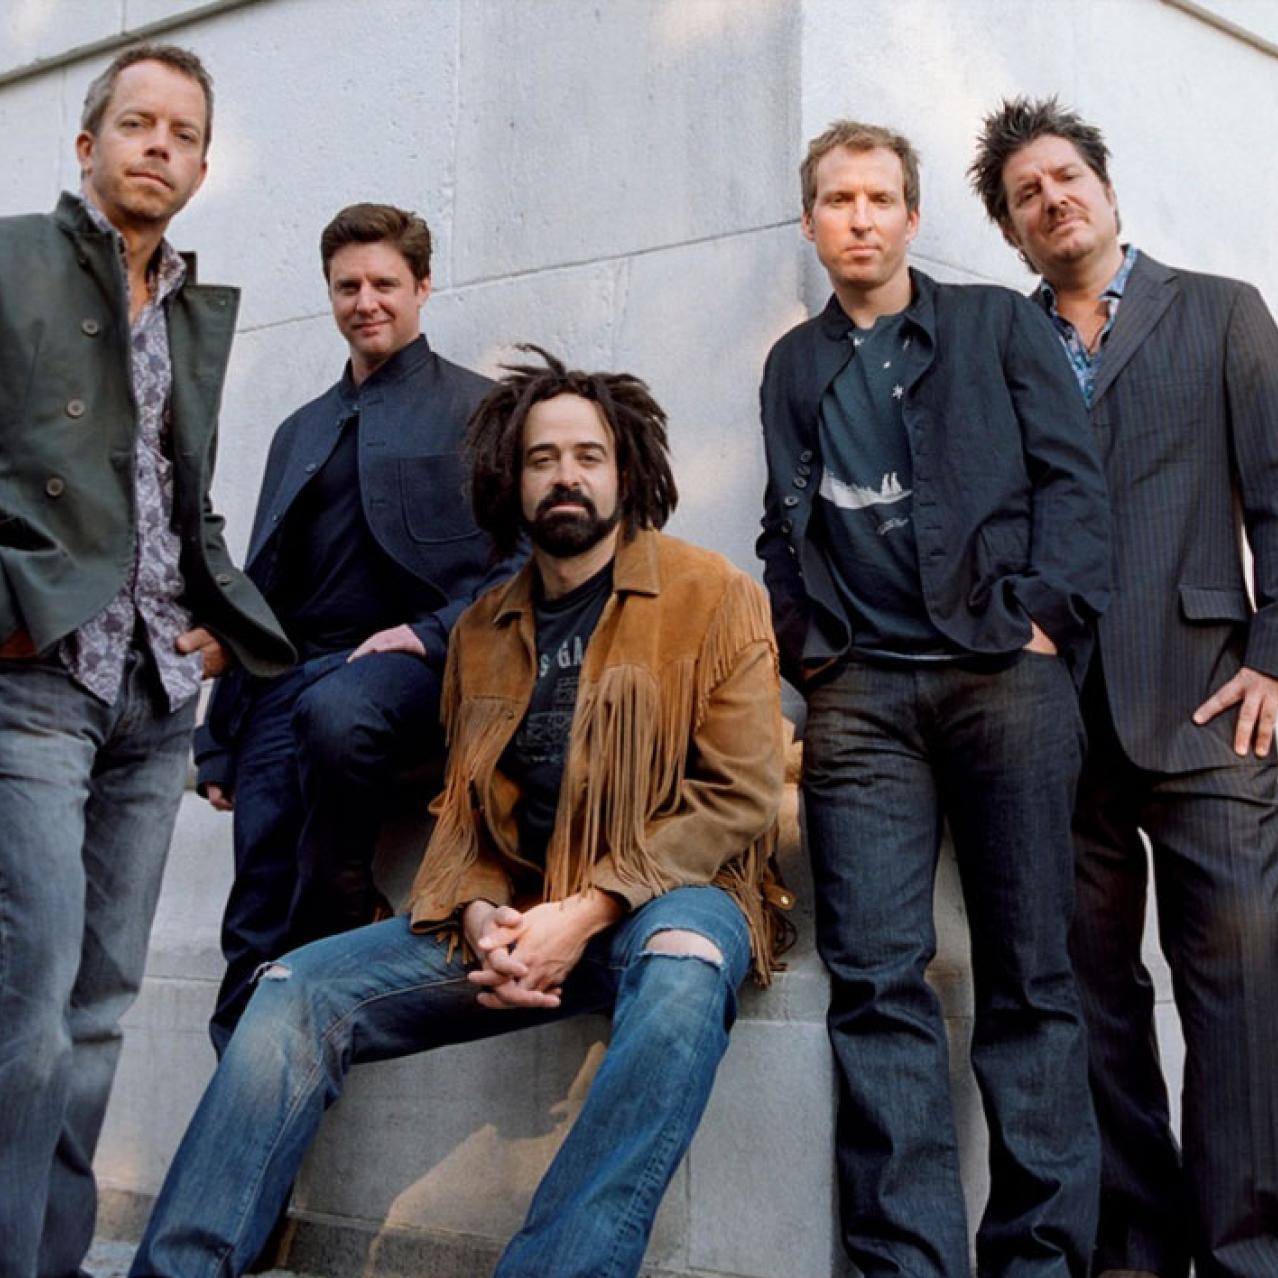 Counting Crows promo picture